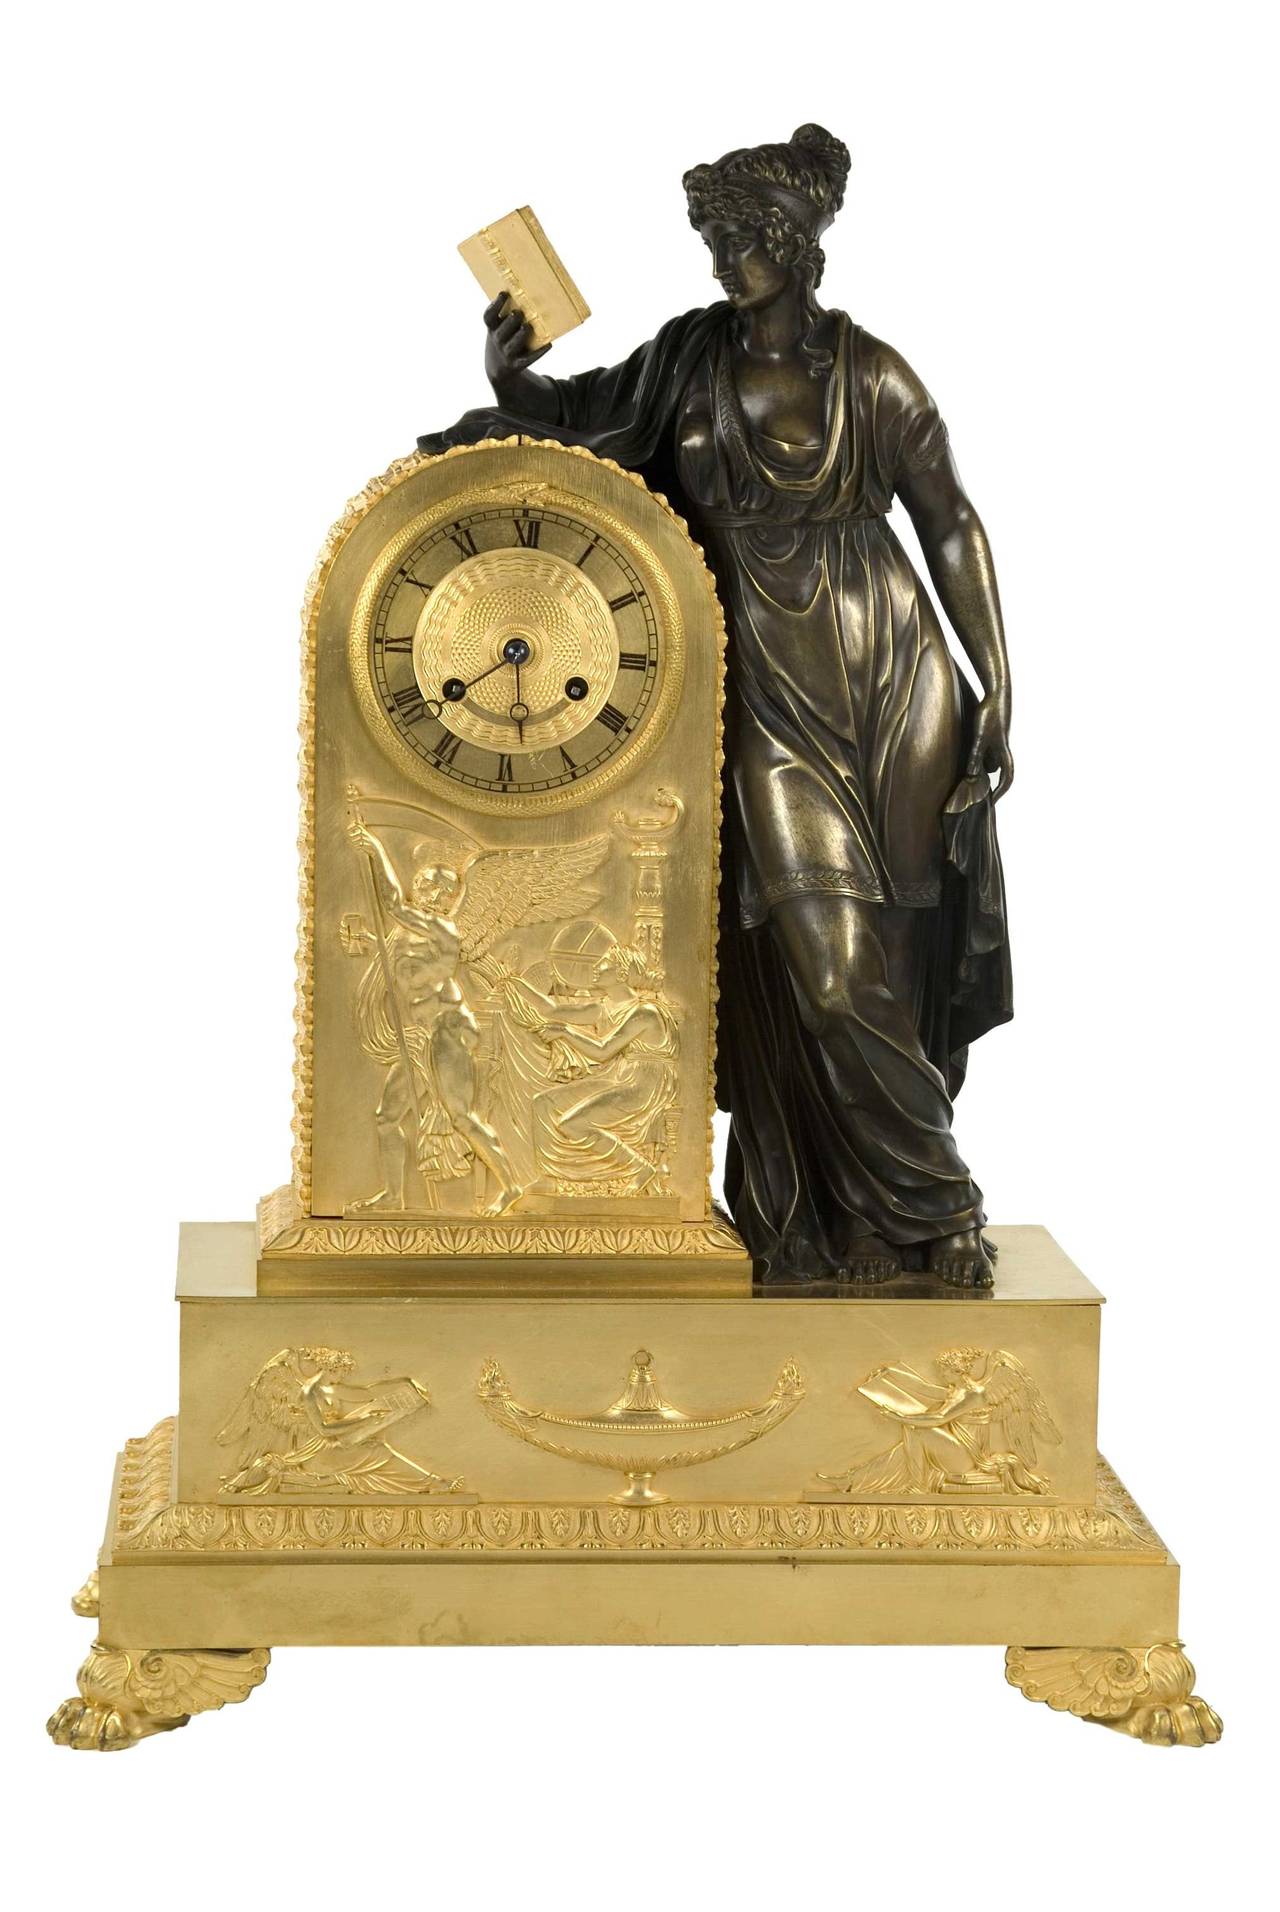 Blackened French Empire Clock of Clio, Muse of History and Writing, French, circa 1810 For Sale